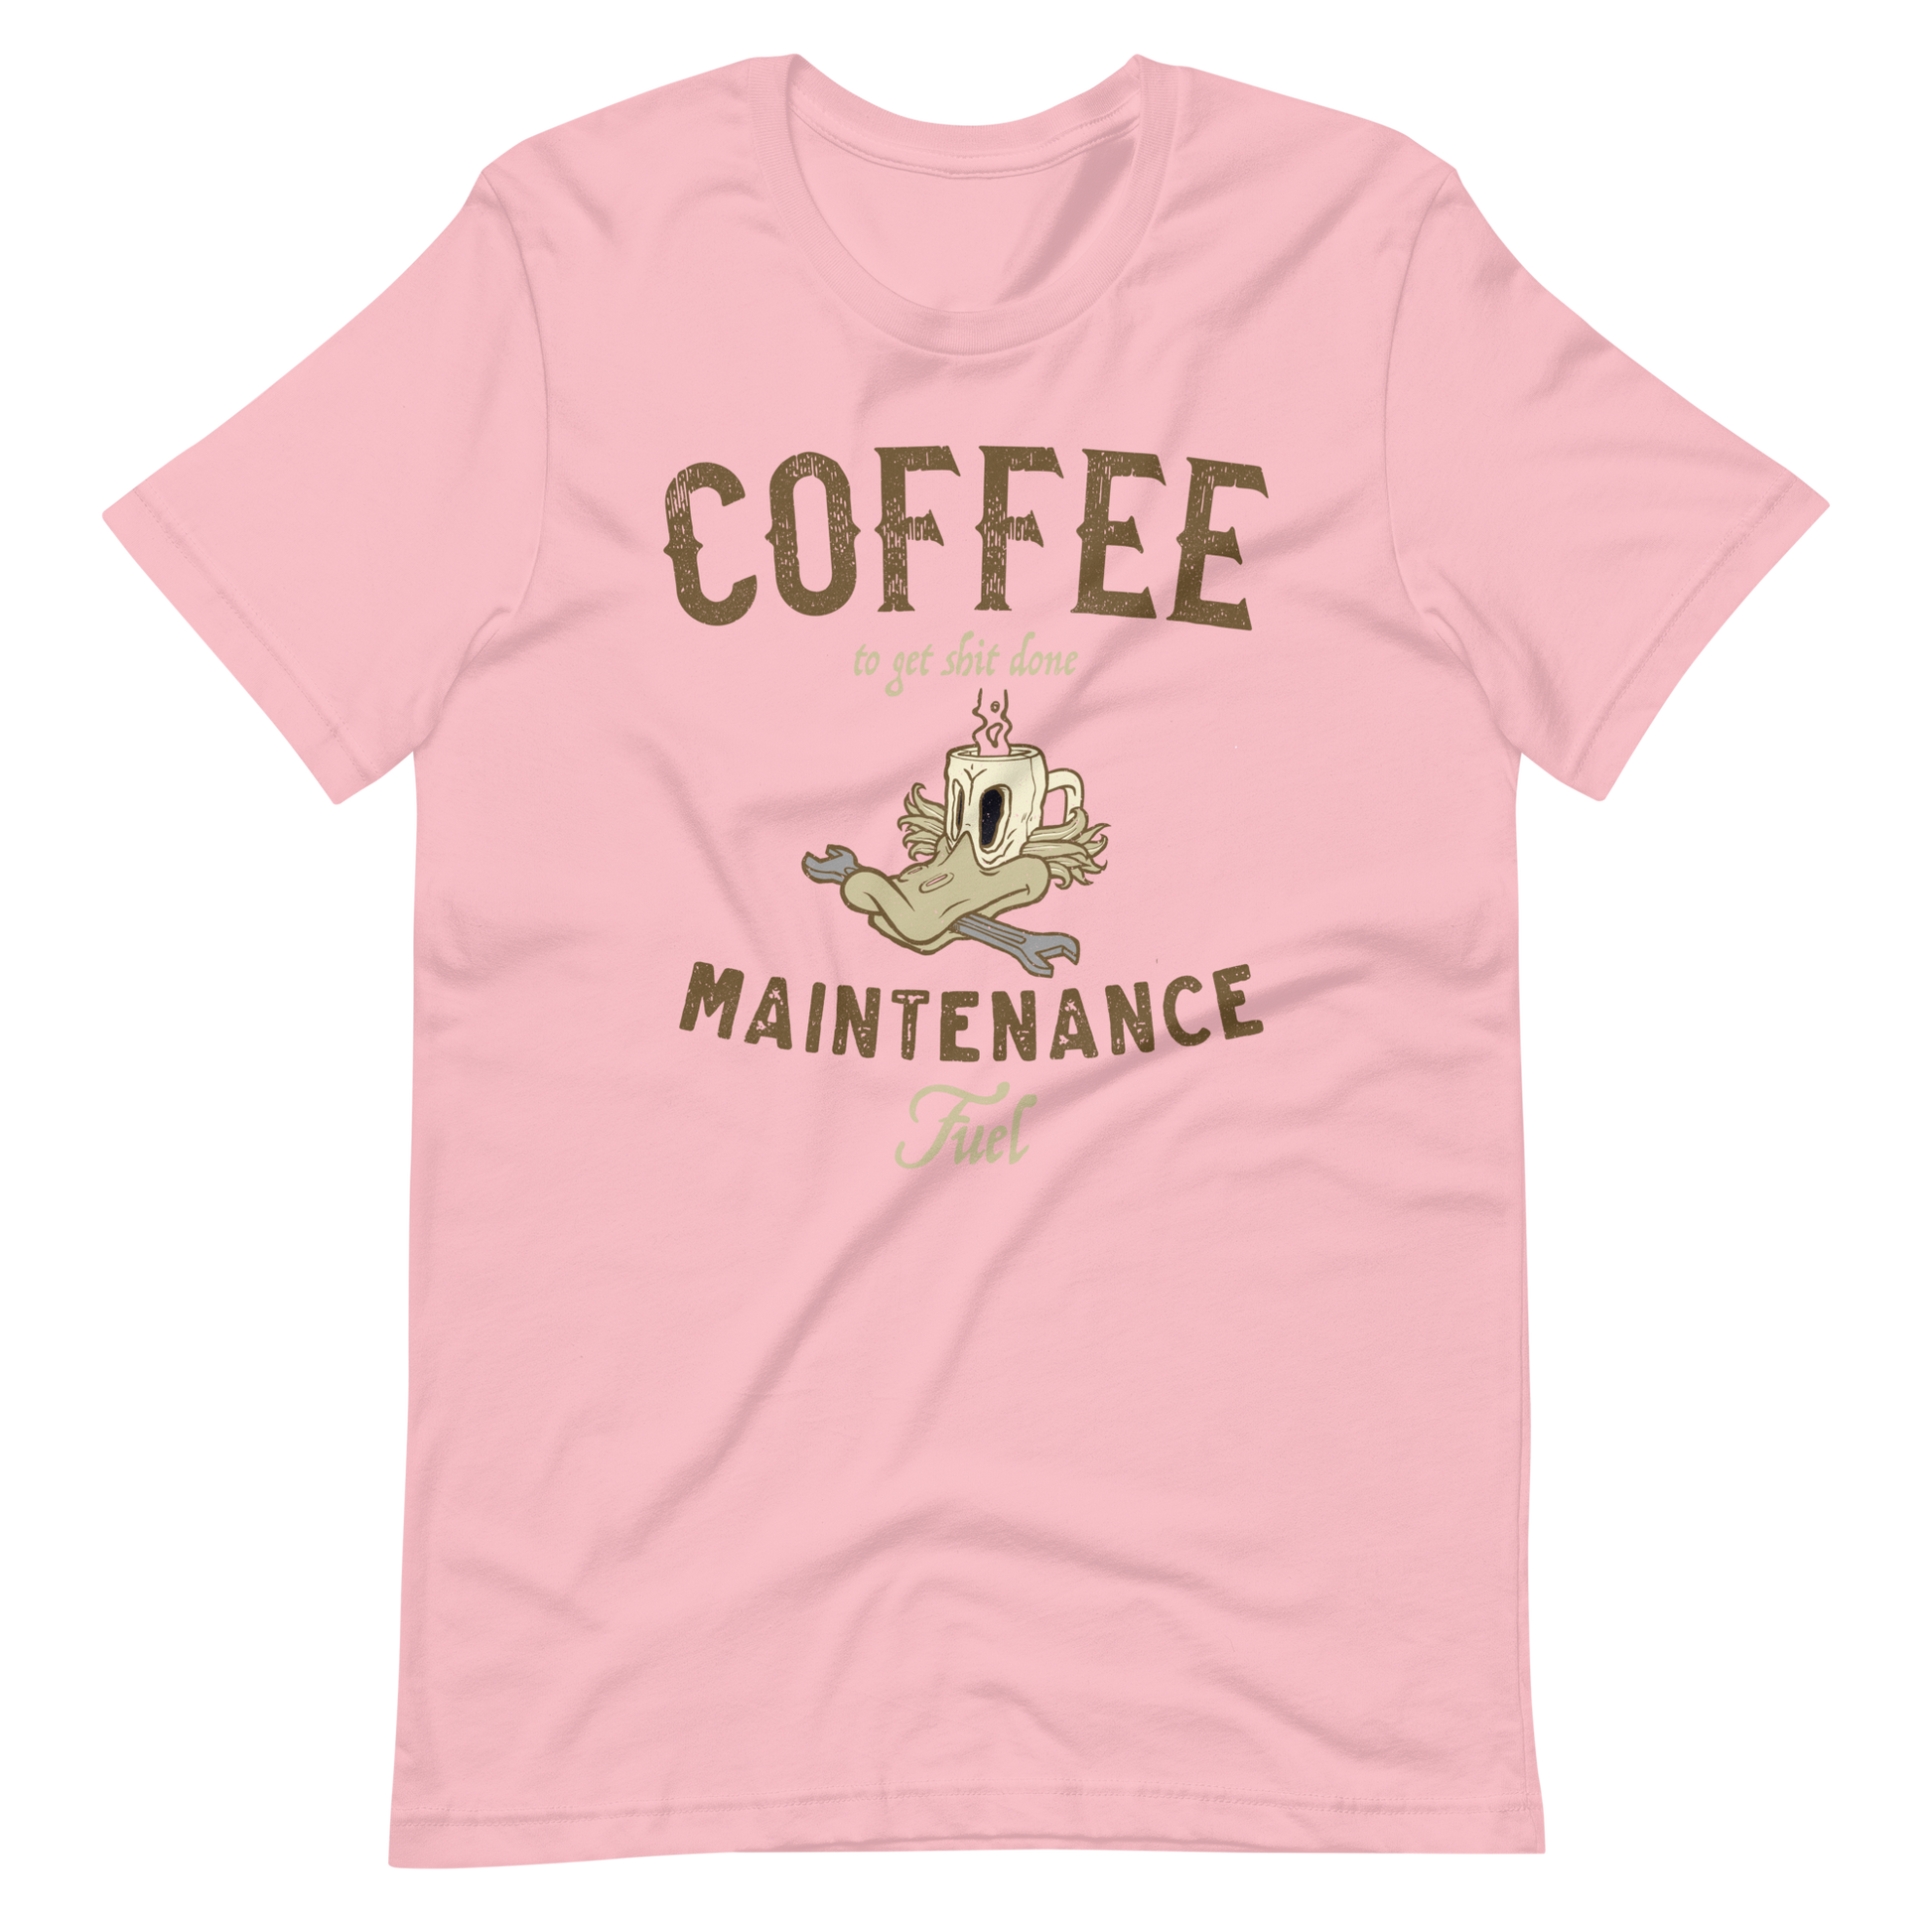 Pink Coffee Maintenance Fuel T-shirt Coffee And Bikes Shirt Cafe Racer Shirt Hard Work And Coffee Lover Get The Shit Done Coffee Biker Shirt